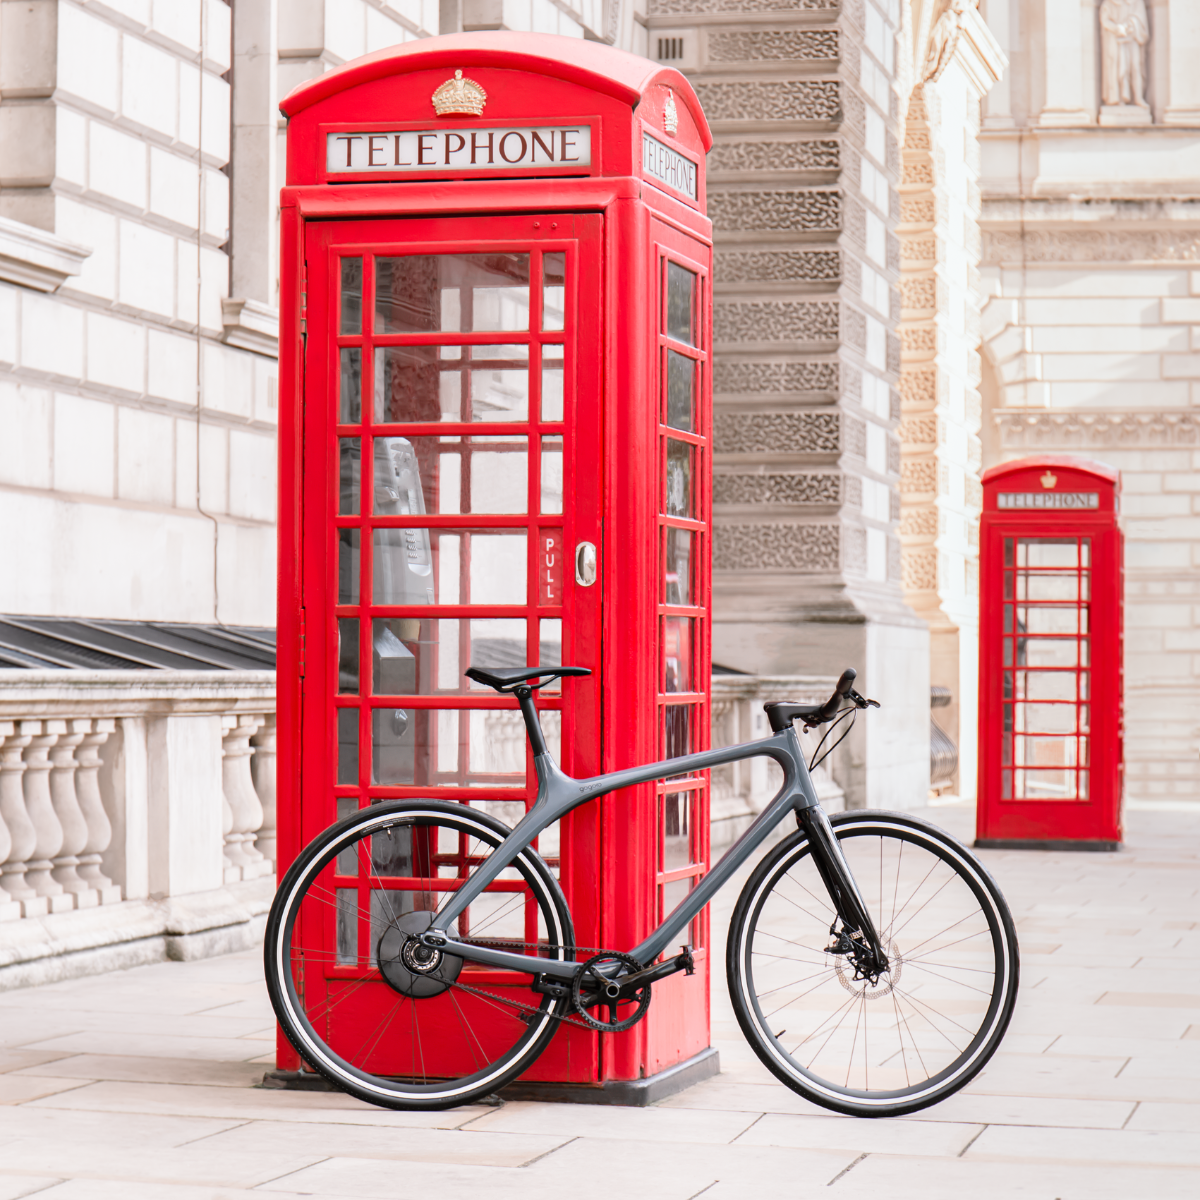 A gray Gogoro Eeyo1 leaning on a red phone box in London